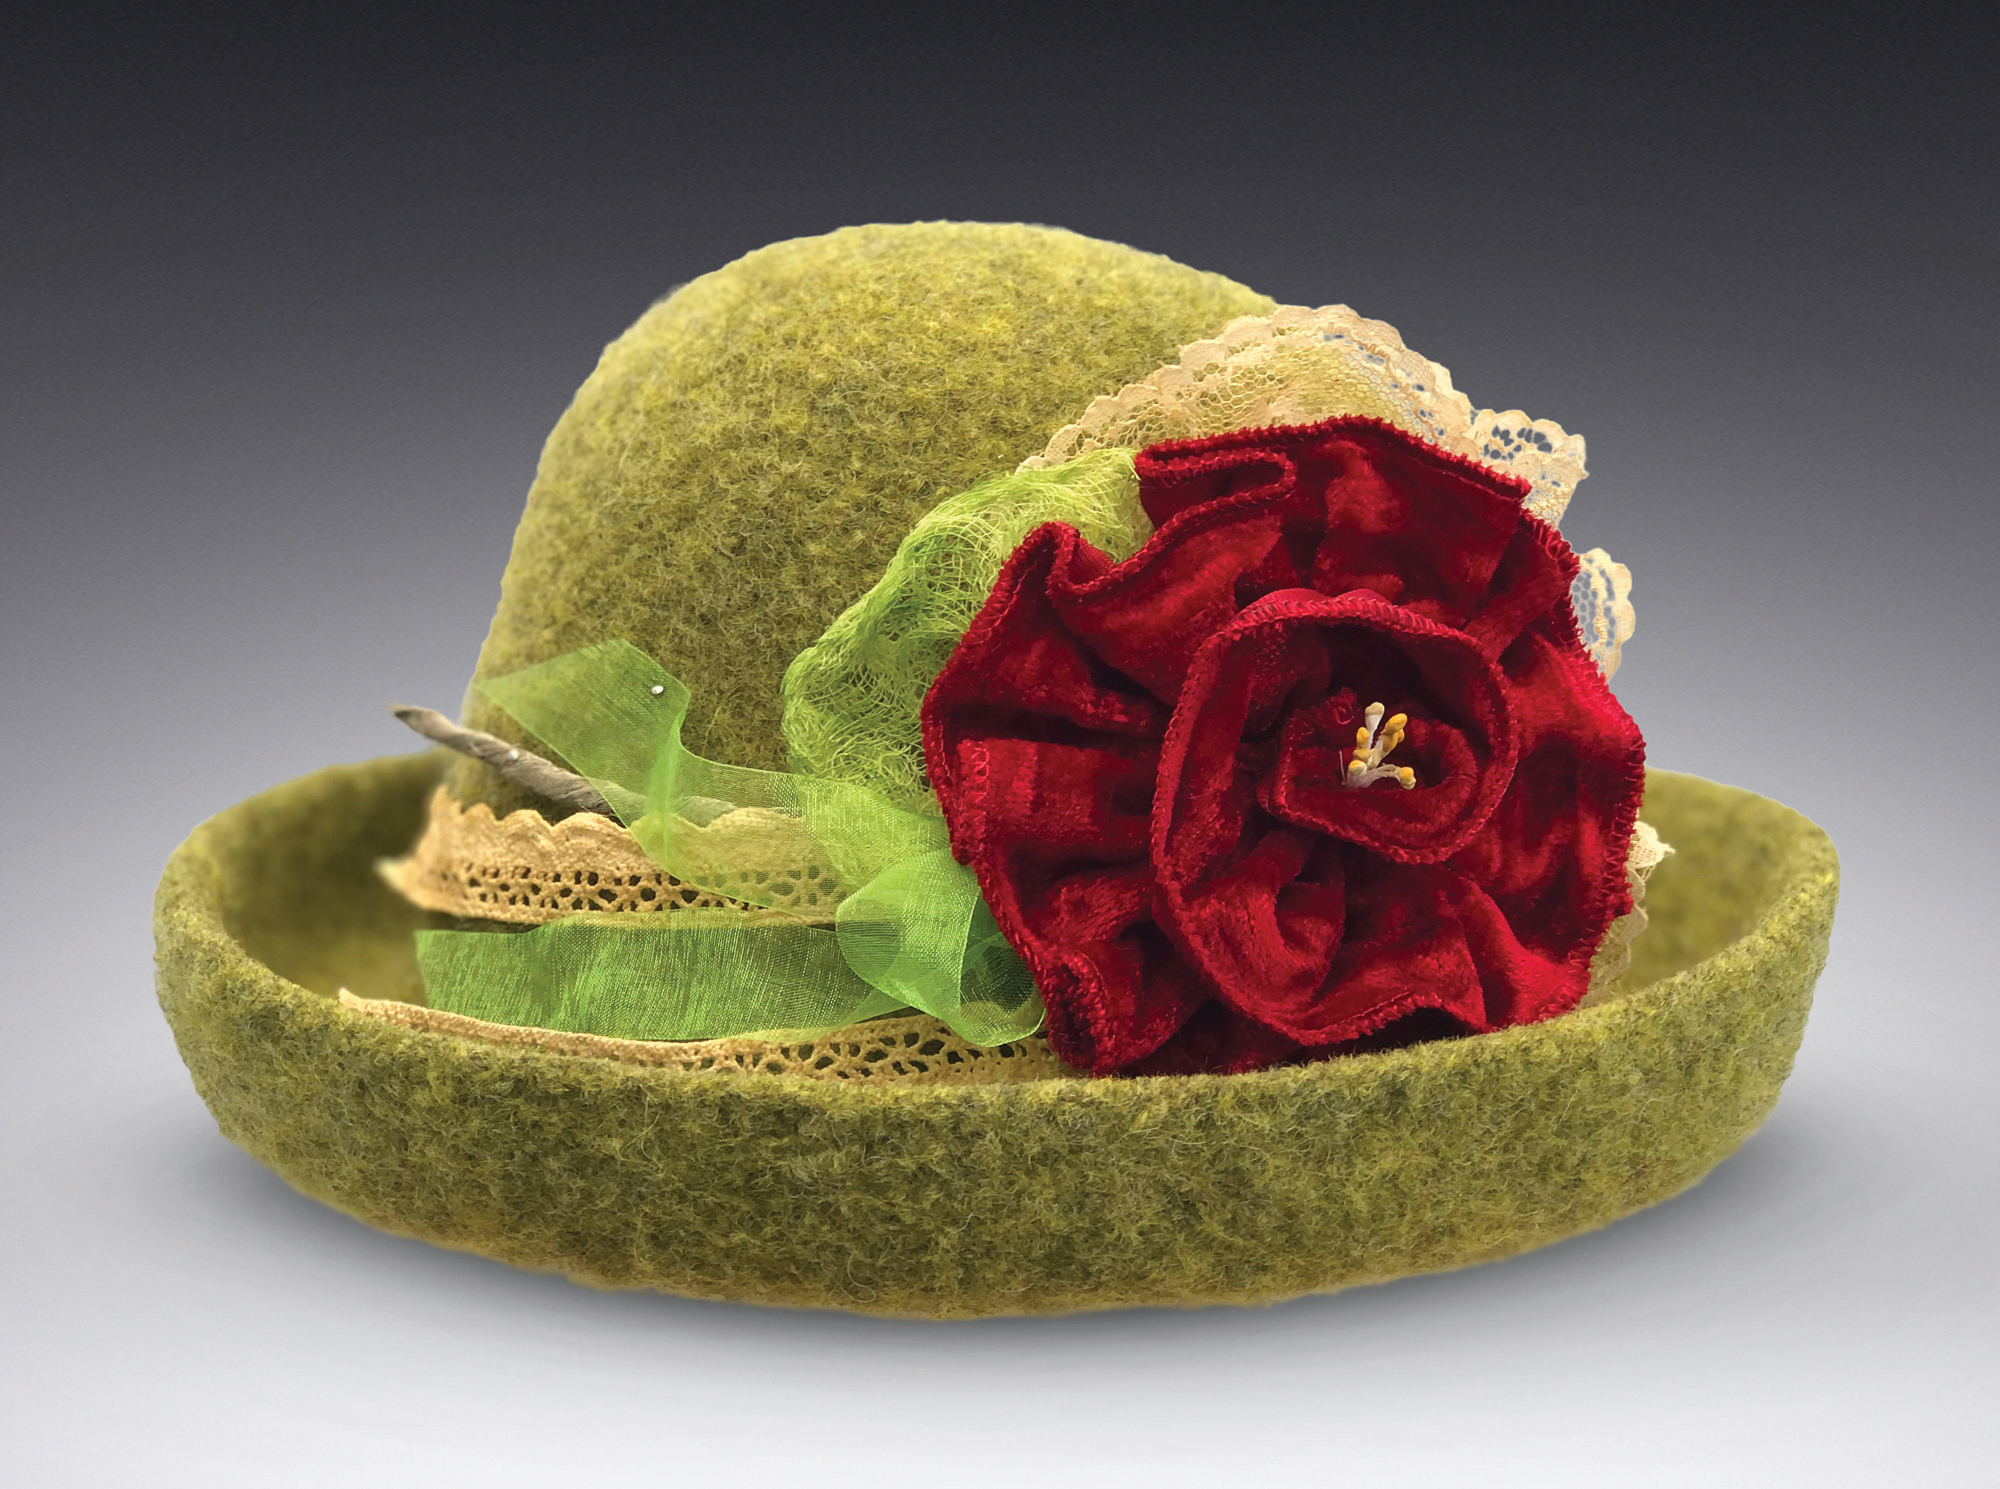 Tess McGuire, "Celery Brimmed Hat with Flower Pin" Wool felt, crushed red velvet rose, beads, lace, organdy ribbon. Flower pin is removable.